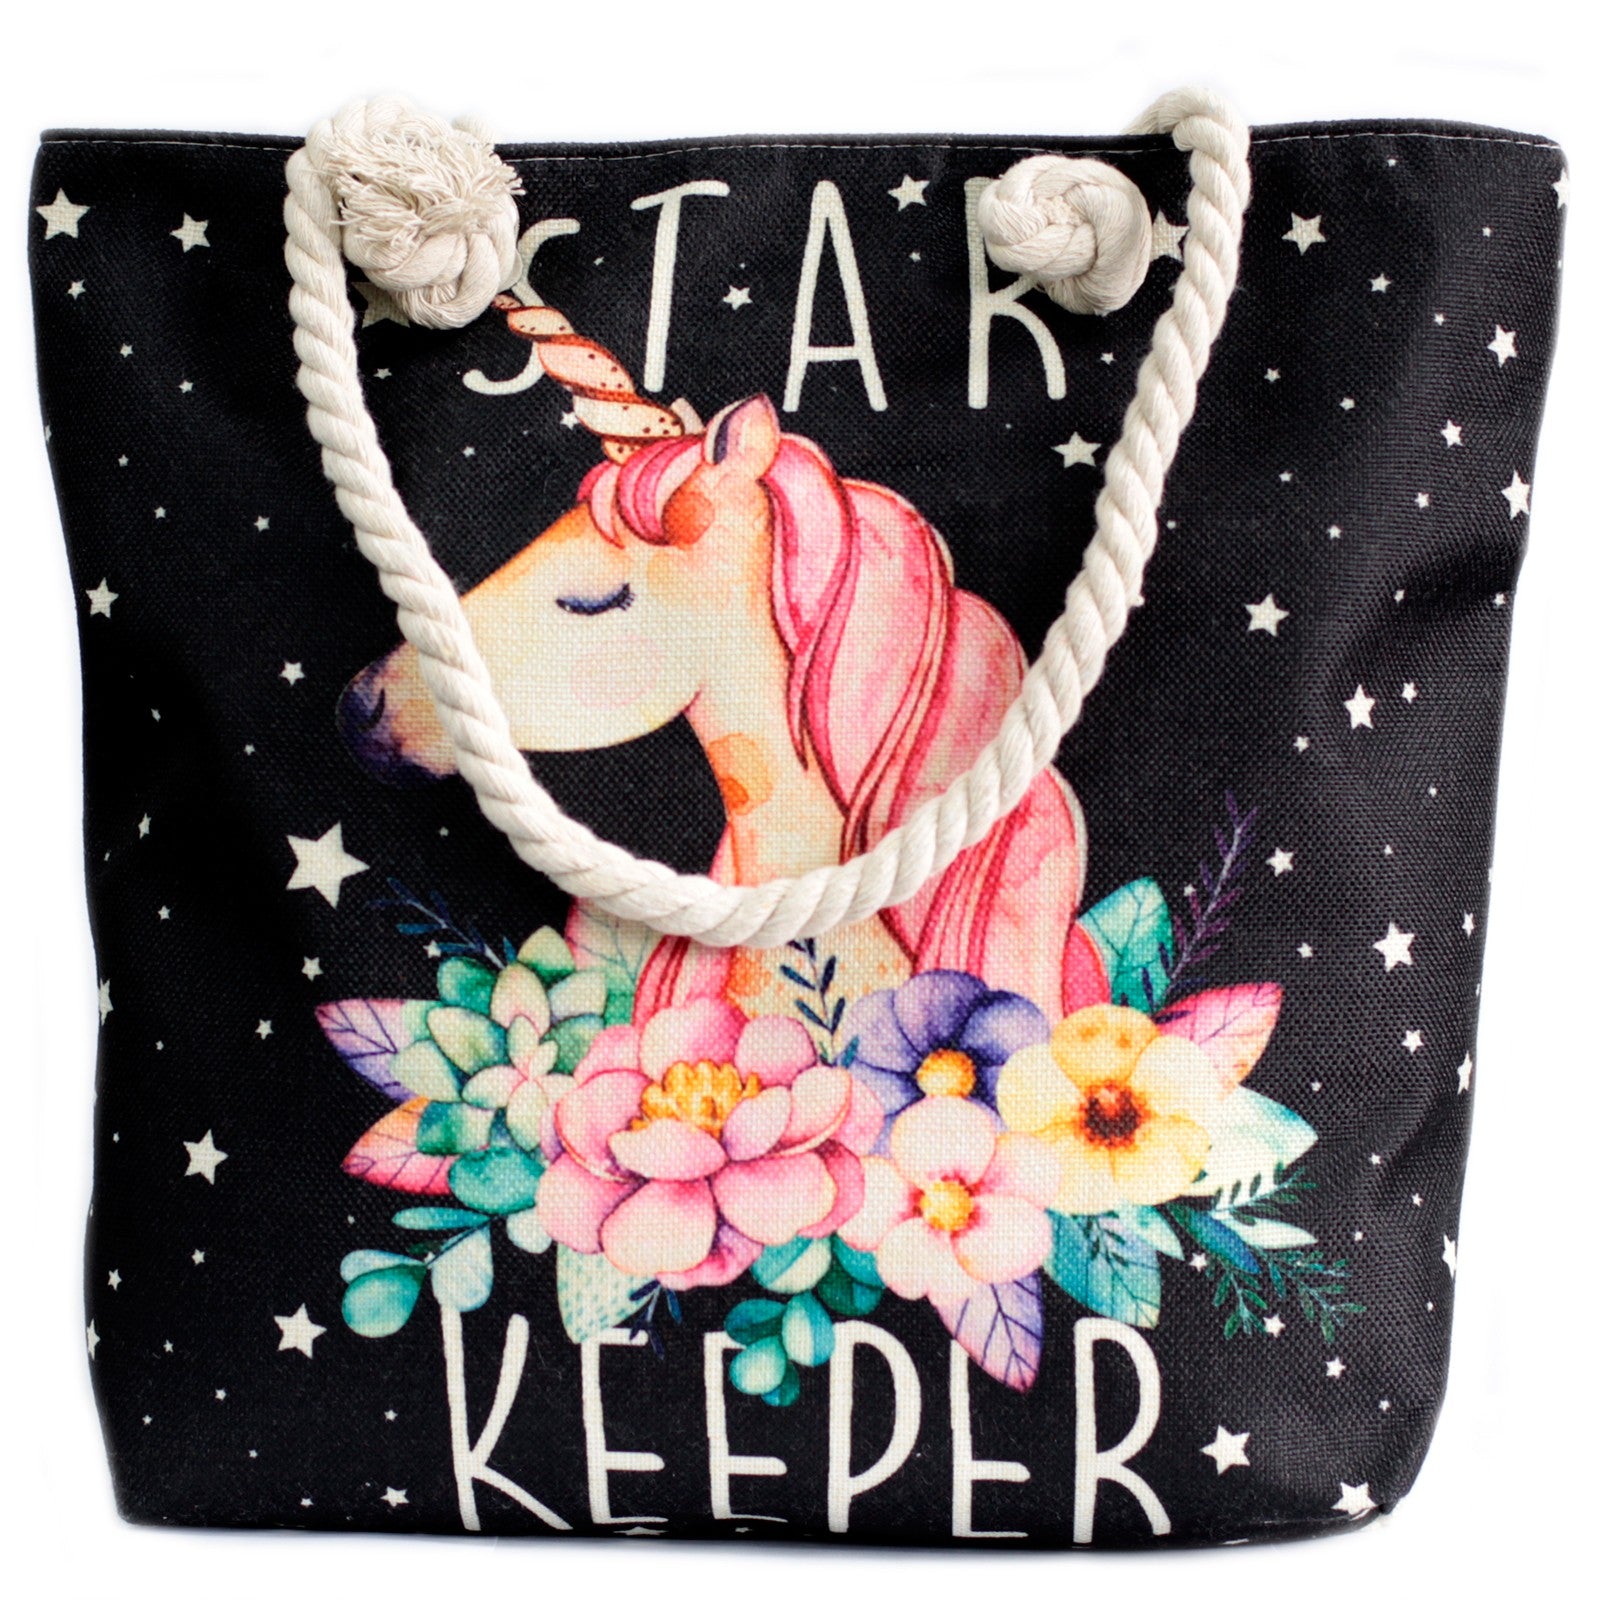 View Rope Handle Bag Star Keeper Unicorn information